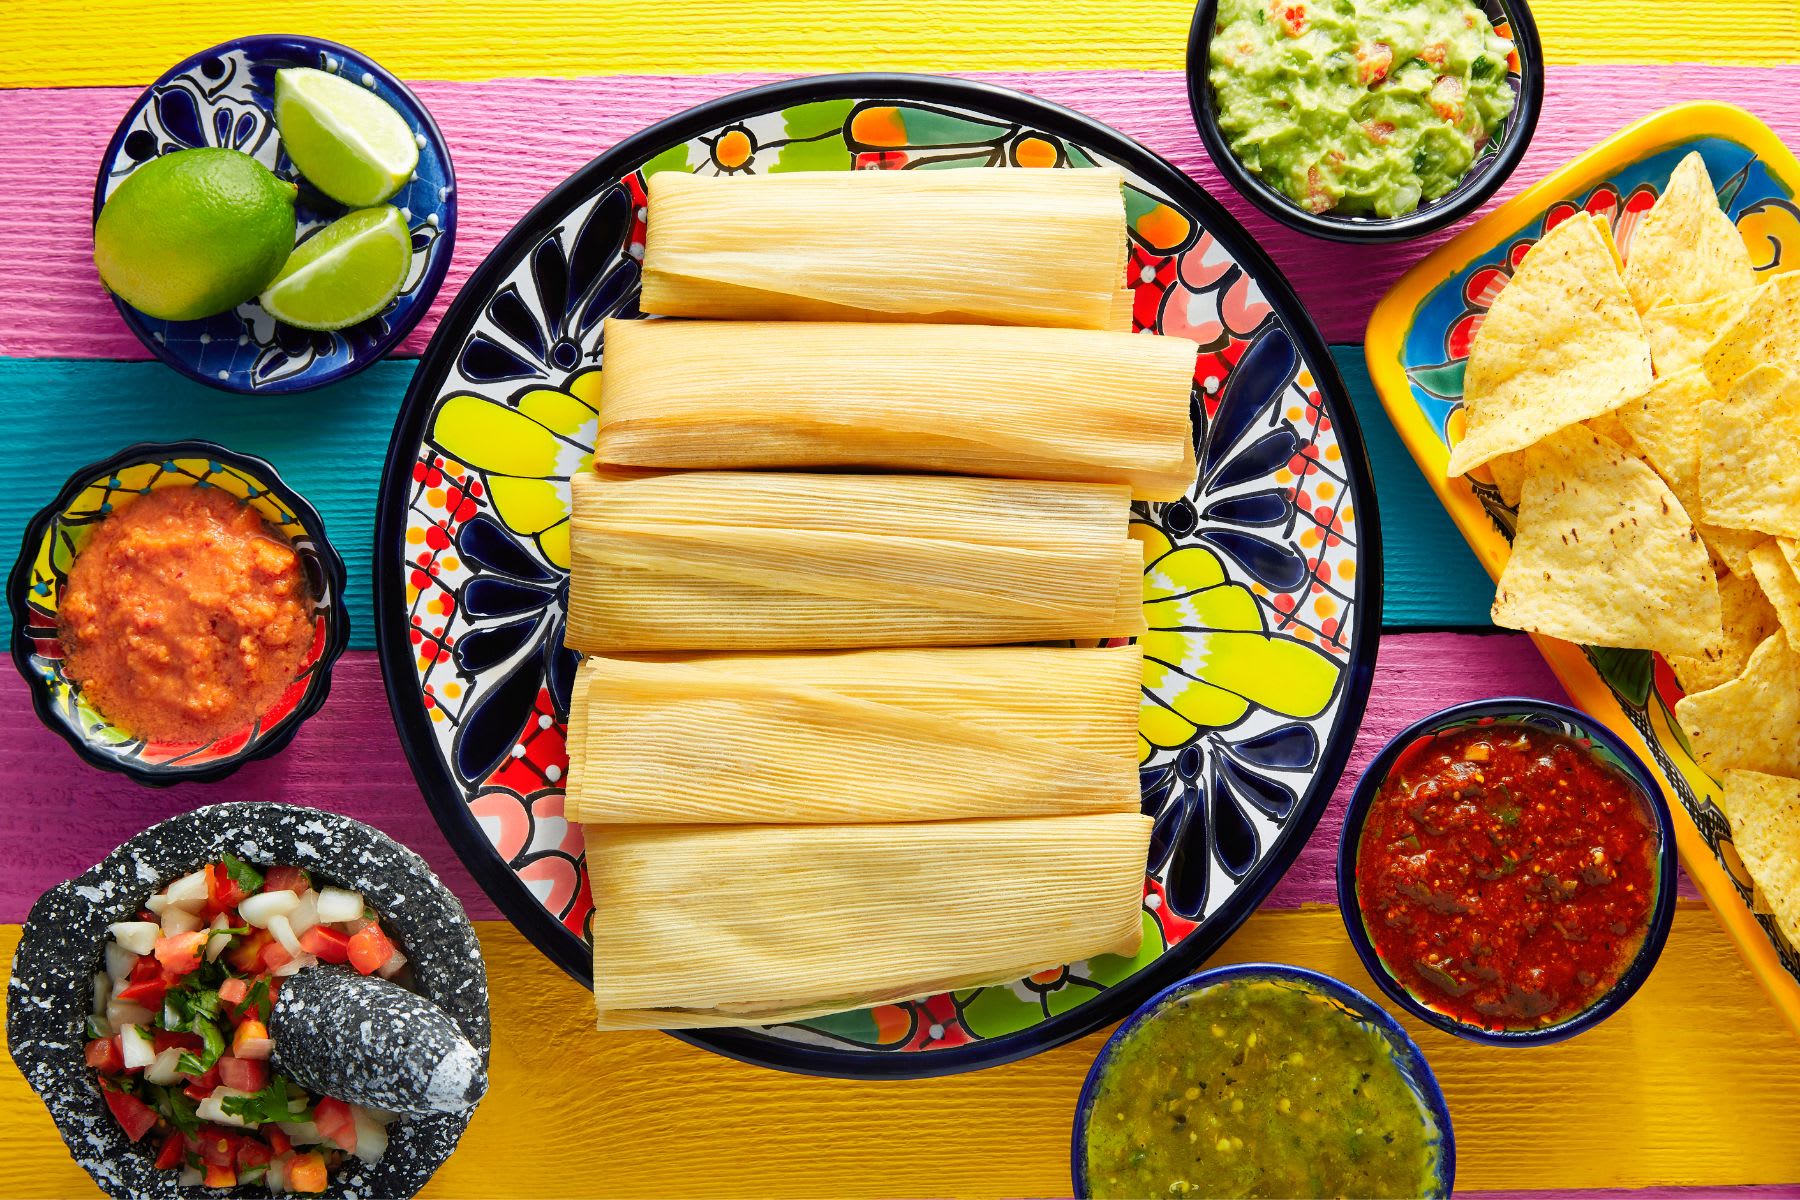 https://food-fanatic-res.cloudinary.com/iu/s--cN9GuSo9--/f_auto,q_auto/v1694024250/how-to-cook-tamales-in-the-oven-photo